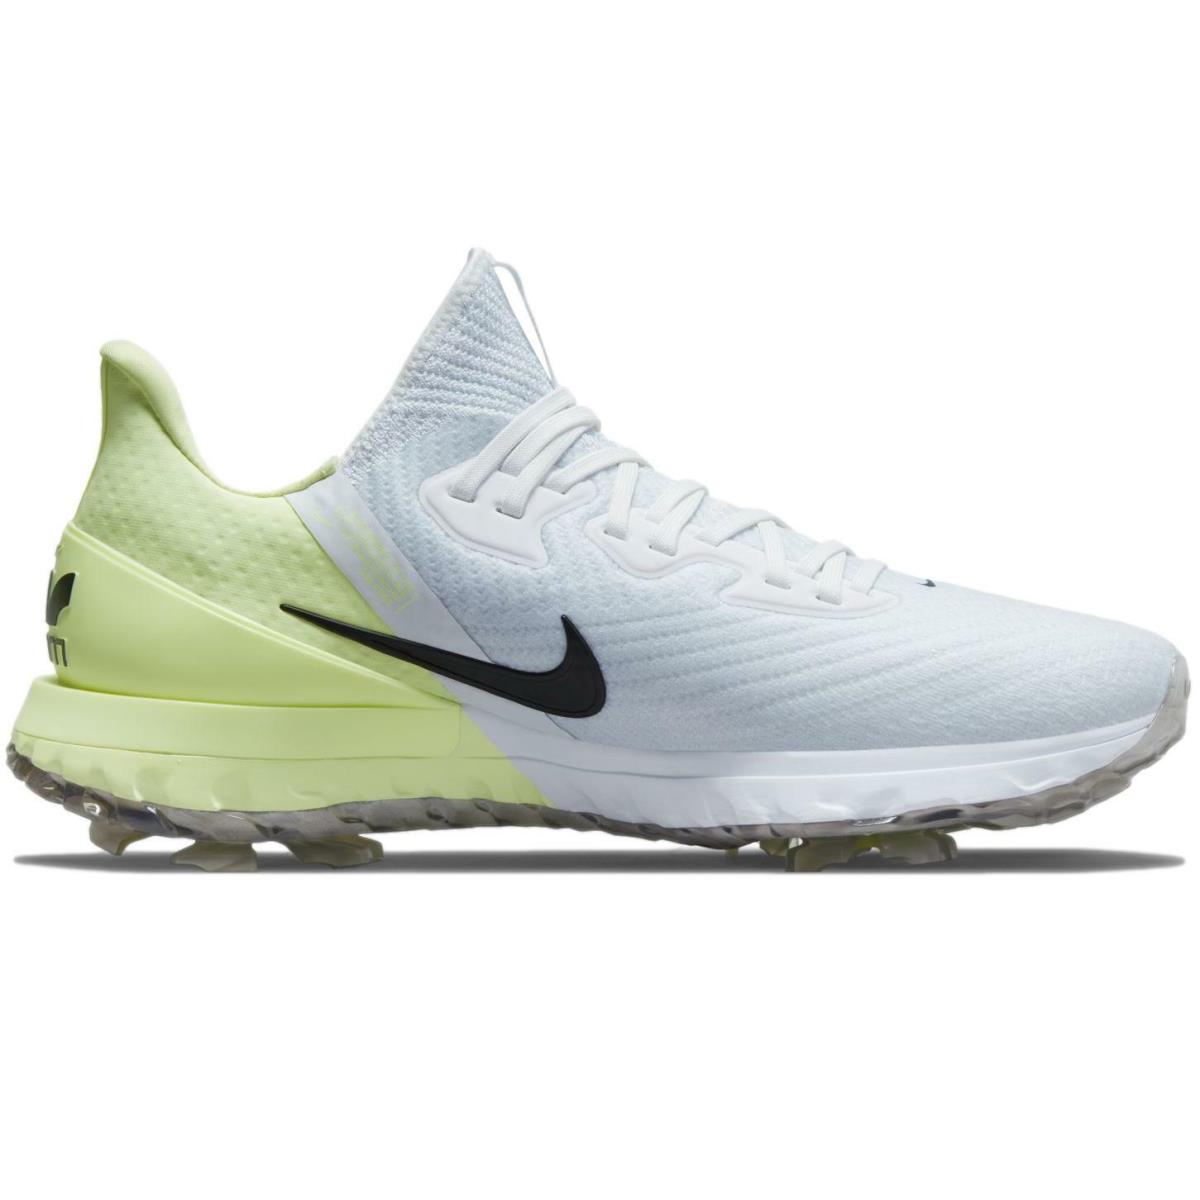 Nike shoes Air Zoom Infinity - White/Black-Barely Volt-Volt 2